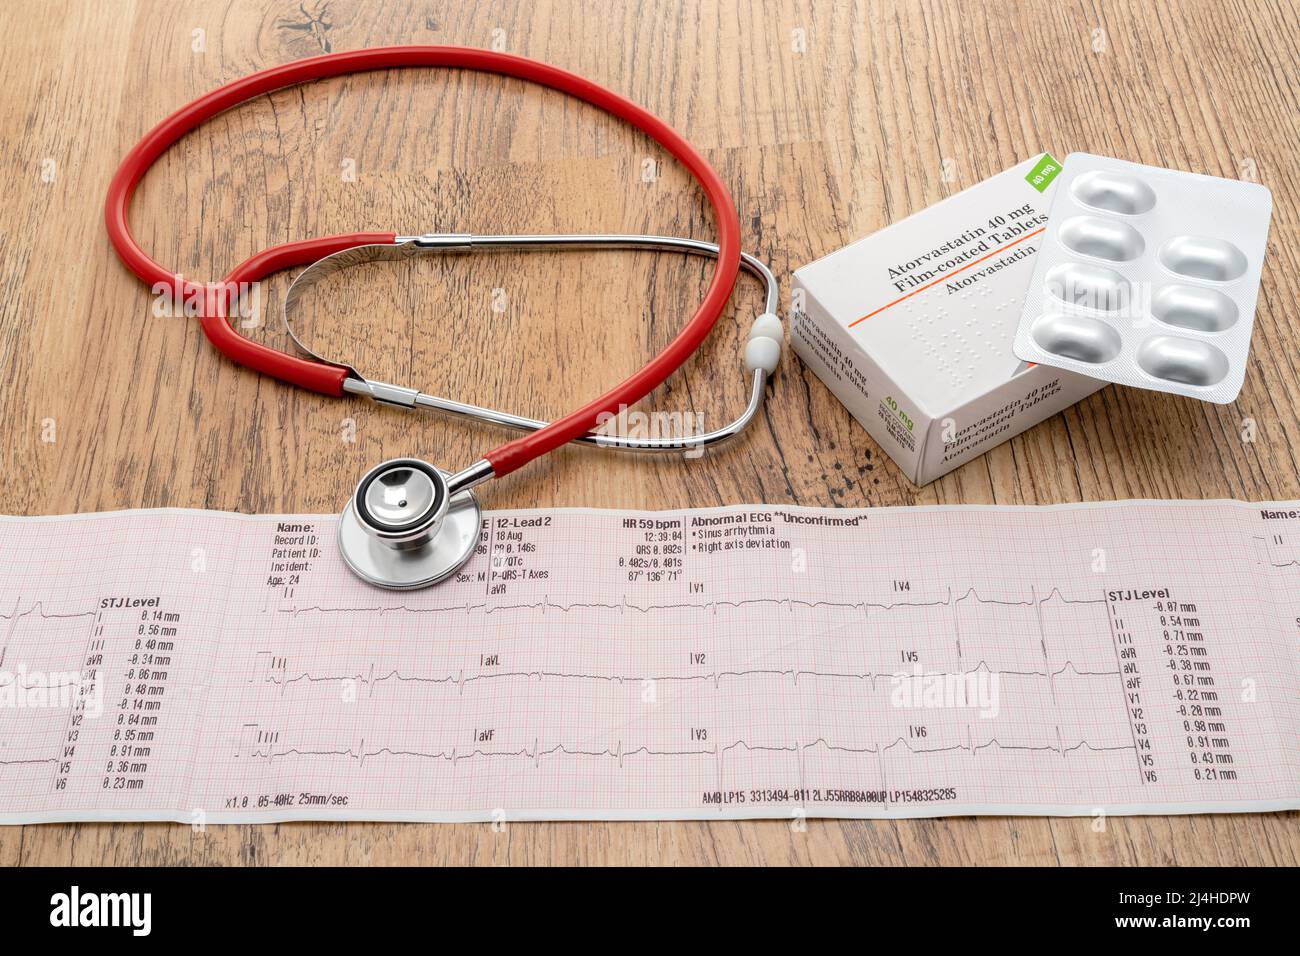 A heart trace ECG with a generic box of Statin pills and a stethoscope Stock Photo